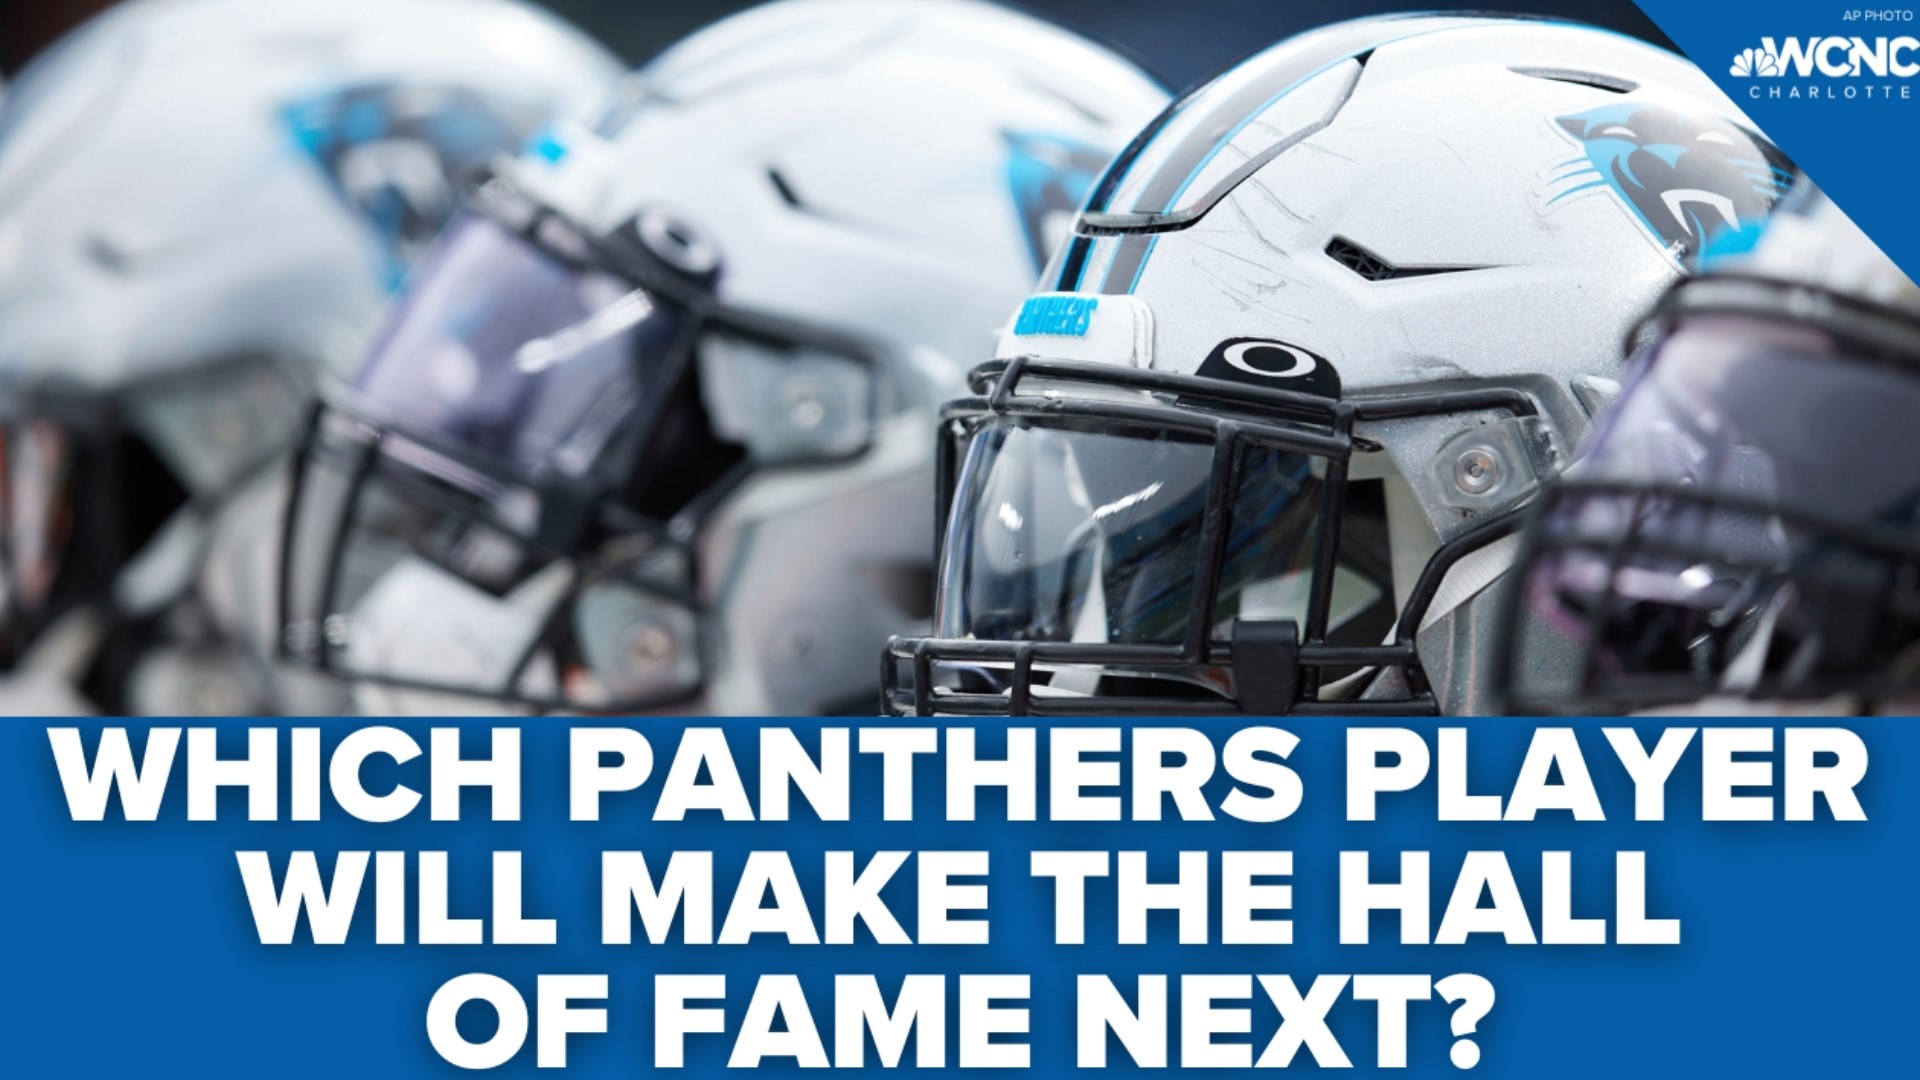 Julius Peppers and Steve Smith seem to be the next likely candidates.